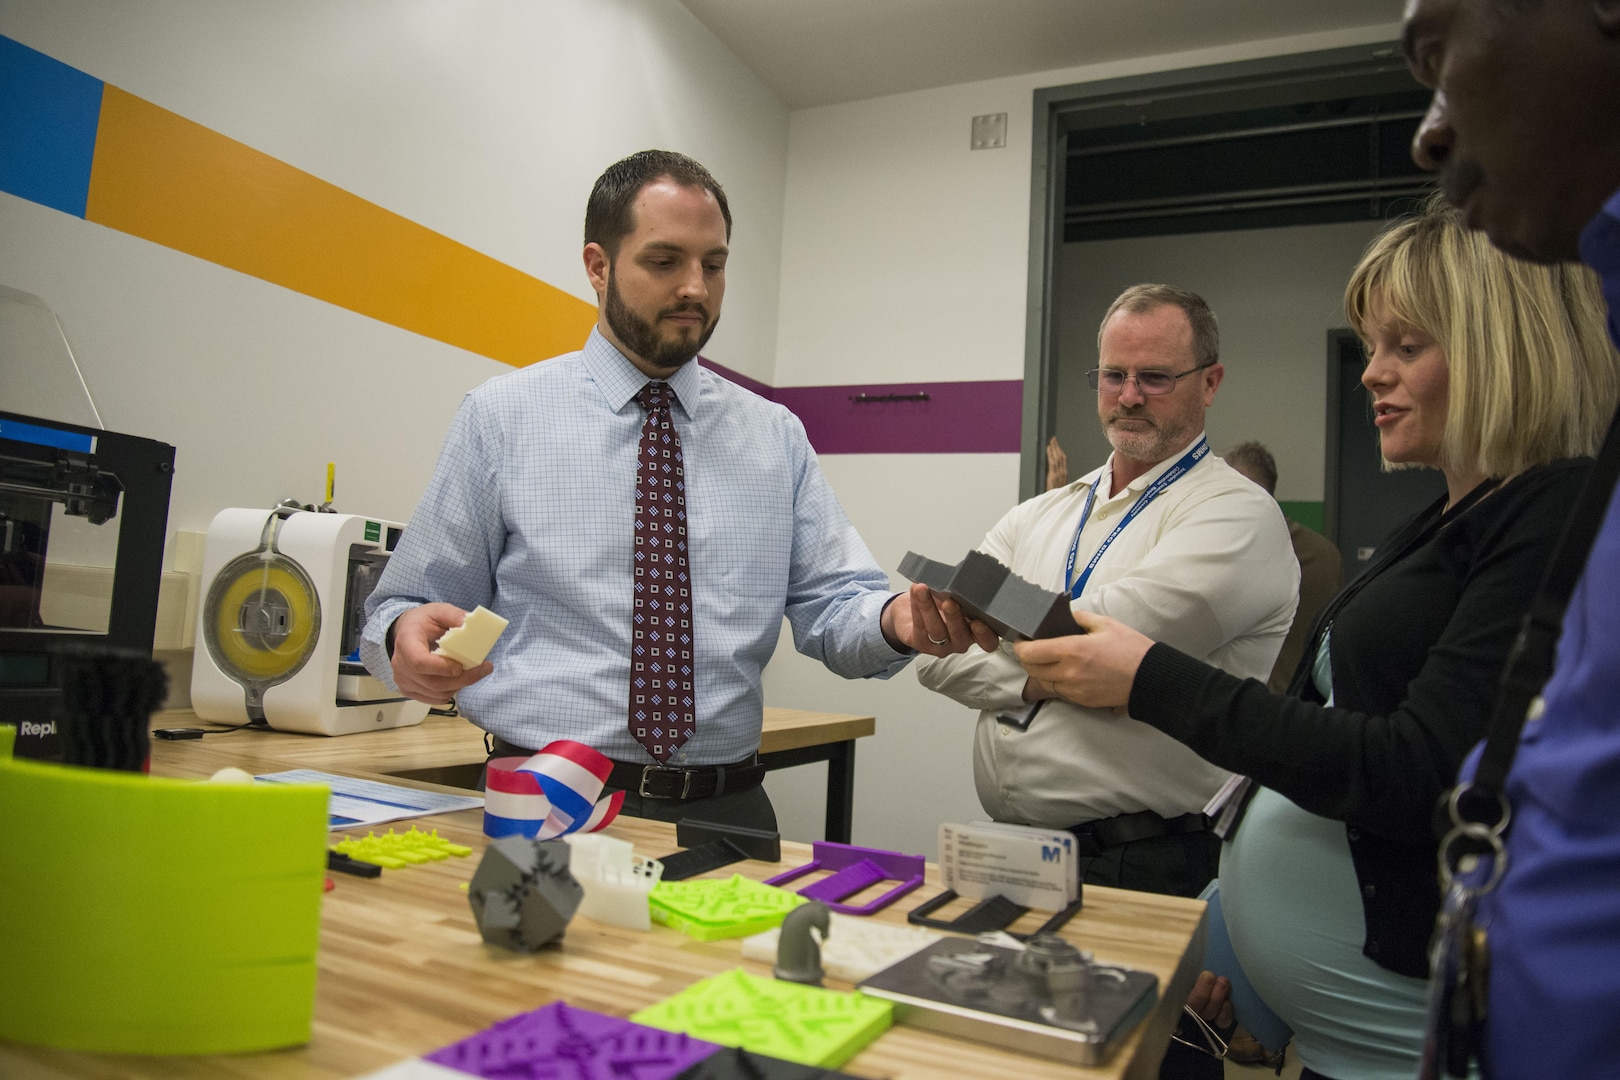 Jonathan Hopkins, a mechanical engineer and Additive Manufacturing (AM) Tiger Team member, shows fellow employees at Naval Surface Warfare Center, Carderock Division objects created through AM during a tour of the new Manufacturing, Knowledge and Education (MAKE) Lab, which officially opened in Building 60 in West Bethesda, Md., March 24, 2016. The MAKE Lab will open training and production in AM, also known as 3-D printing, to all of Carderock’s employees
who desire to participate and exchange ideas. (U.S. Navy photo by Dustin Q. Diaz/Released)